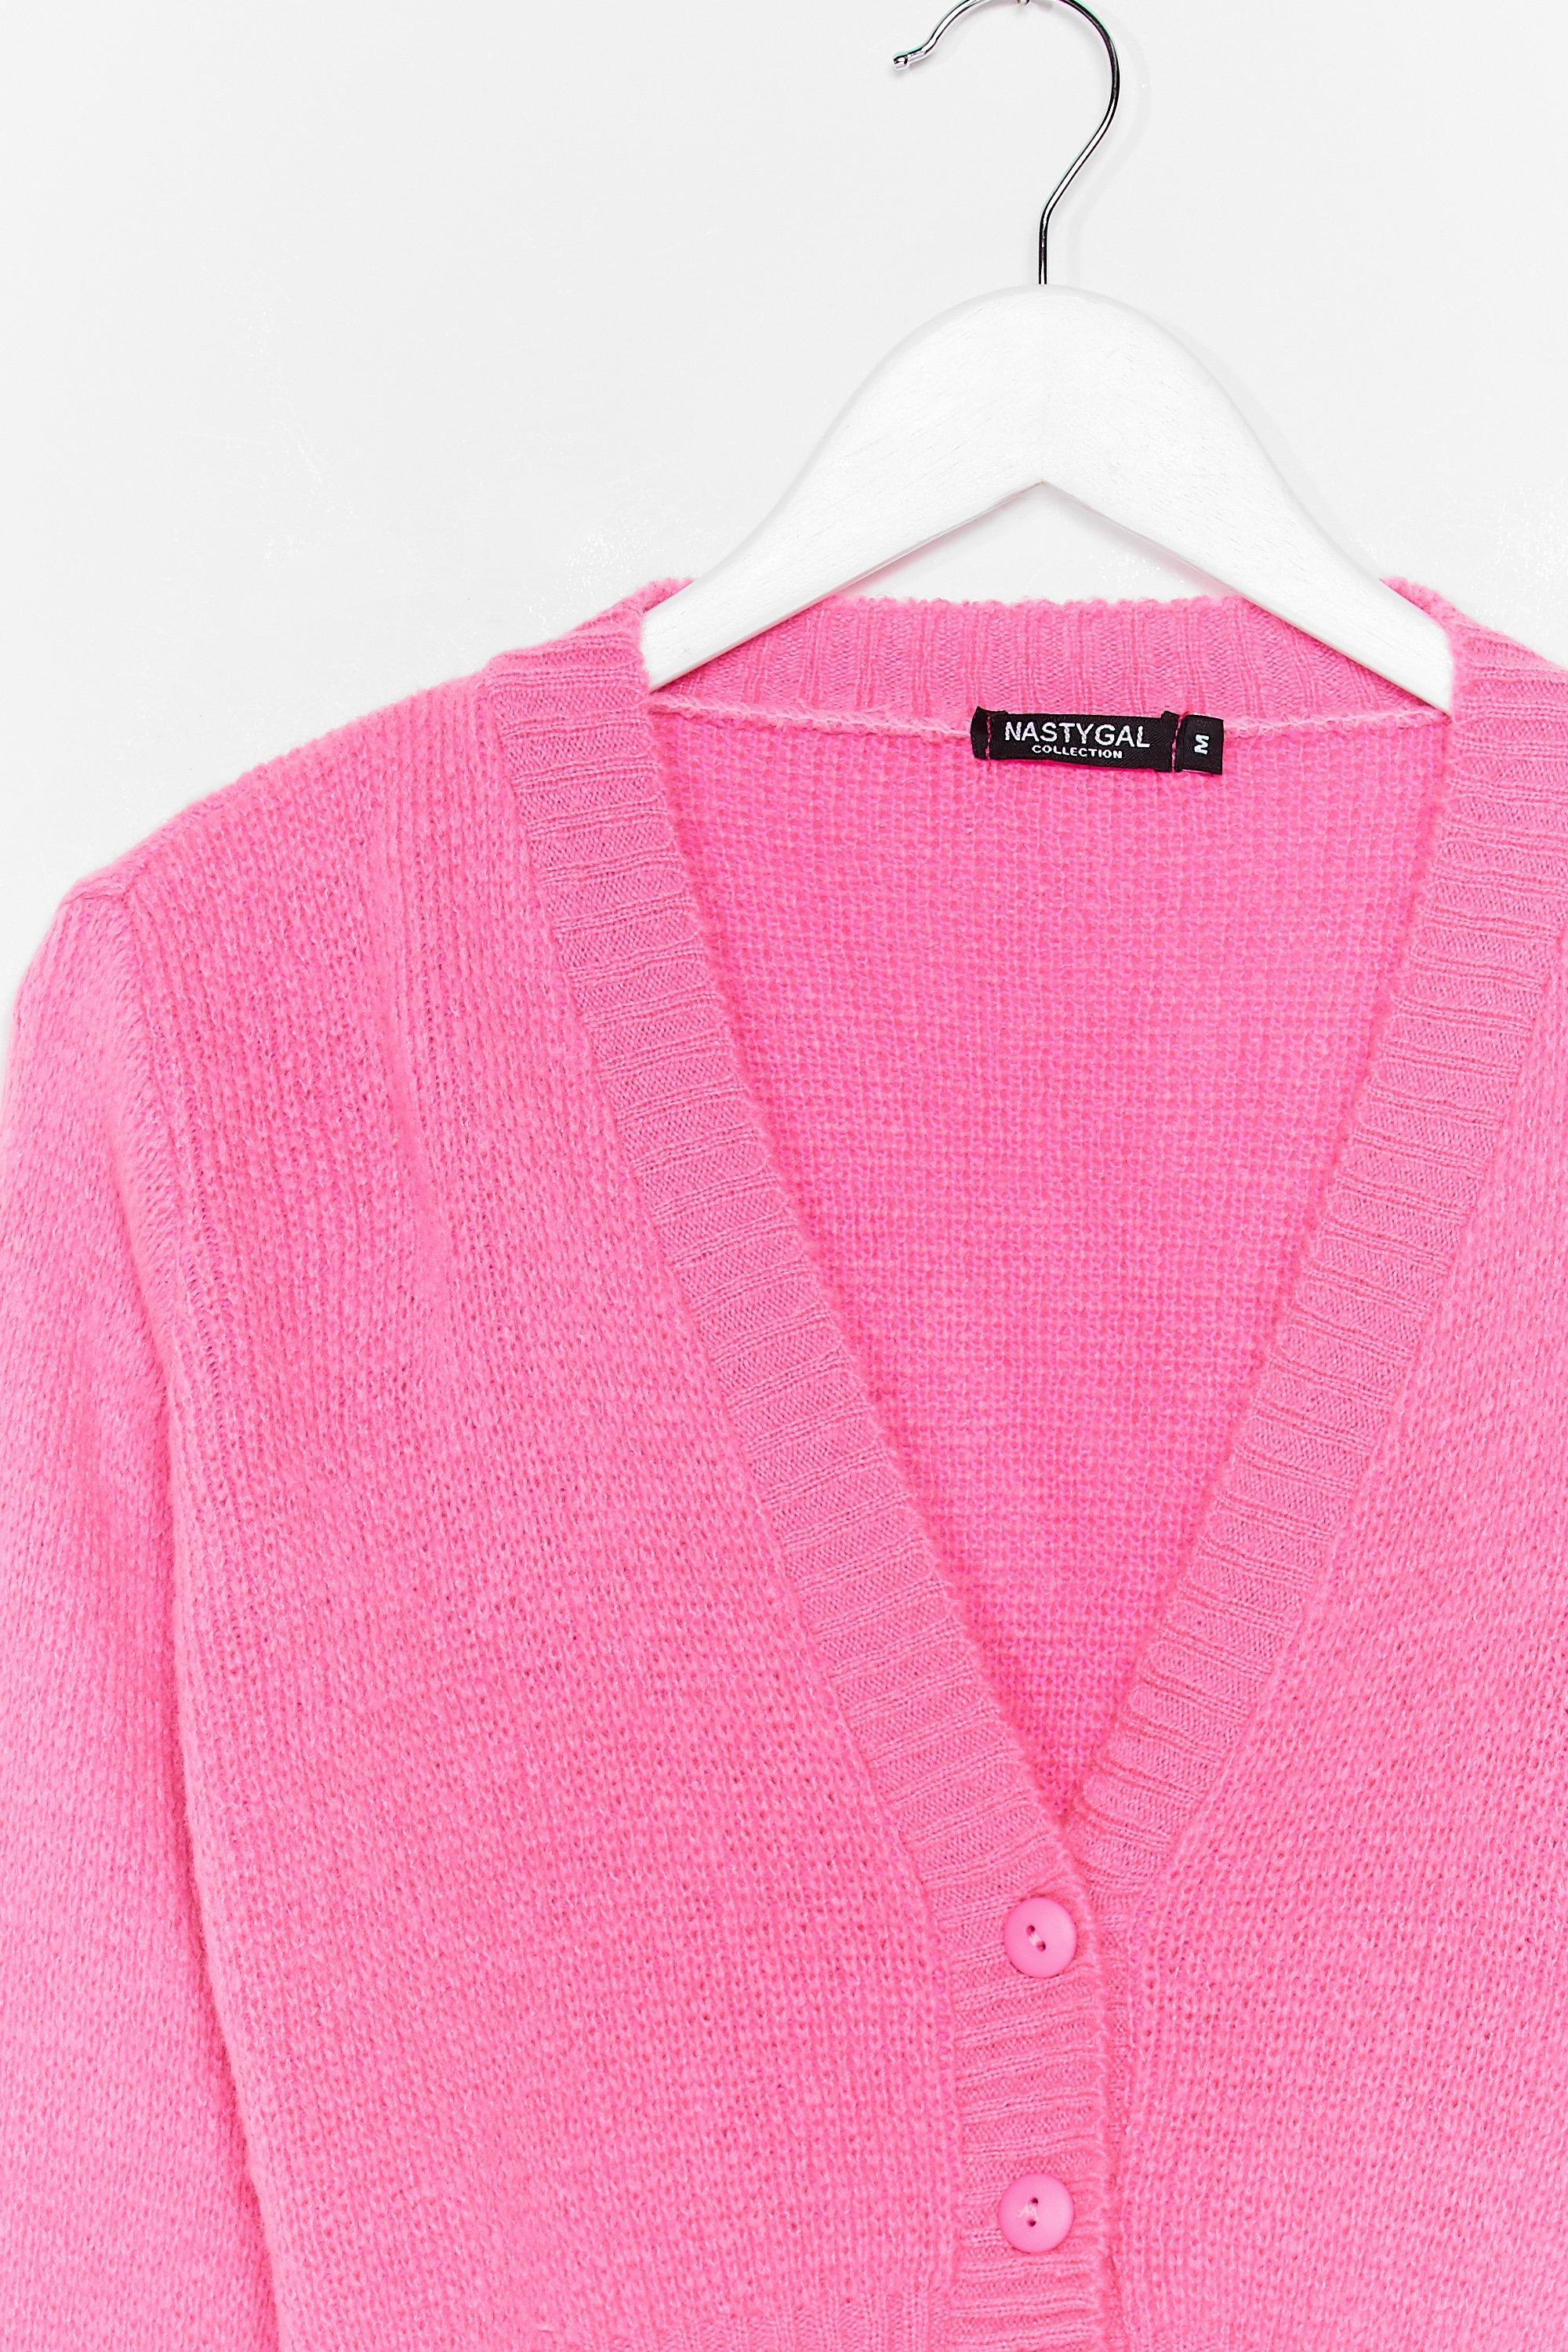 Nasty Gal Knitted V Neck Cropped Cardigan in Pink - Lyst